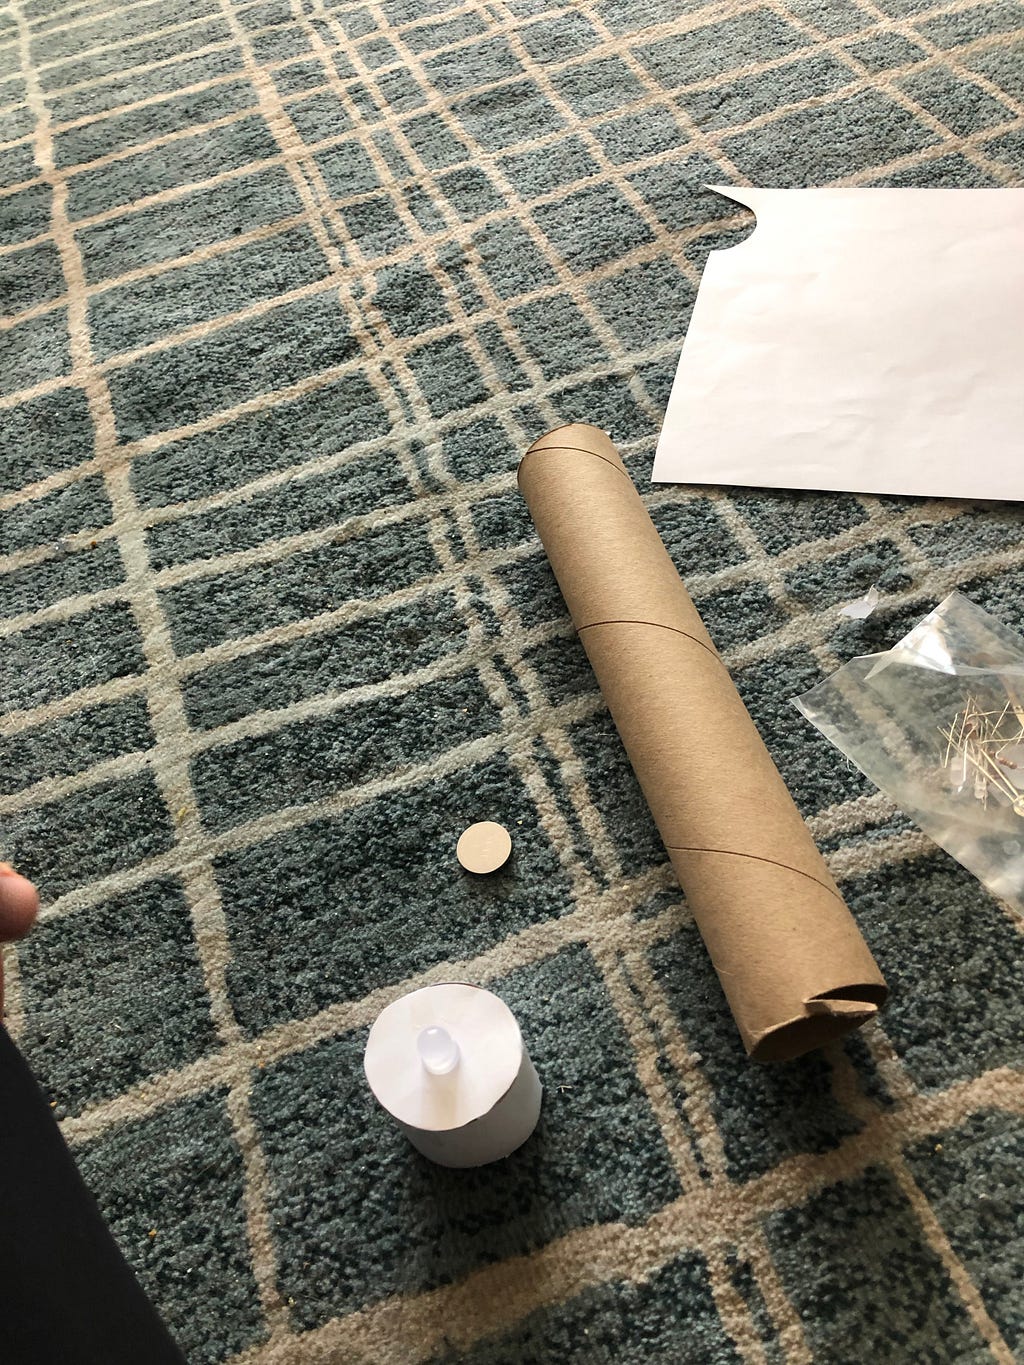 A picture of the paper, paper towel roll and LEDs I used to make a paper tea light enclosure.